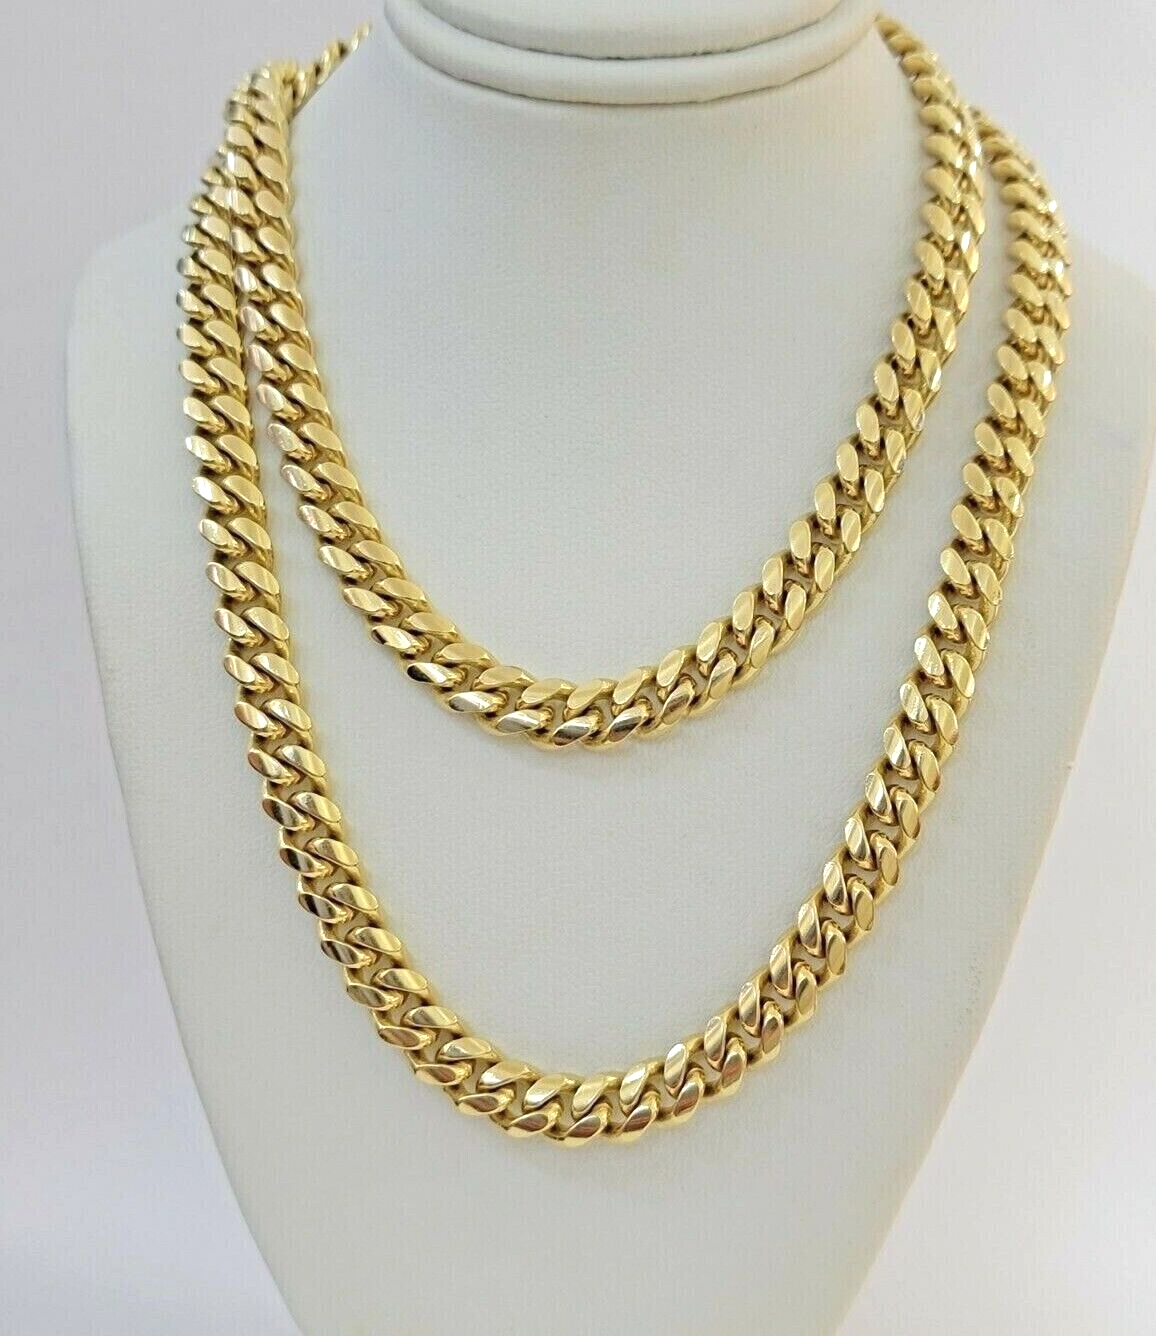 Real 14k Yellow Gold Chain Miami Cuban Link Necklace Mens Solid 8mm 20 Inch 14KT